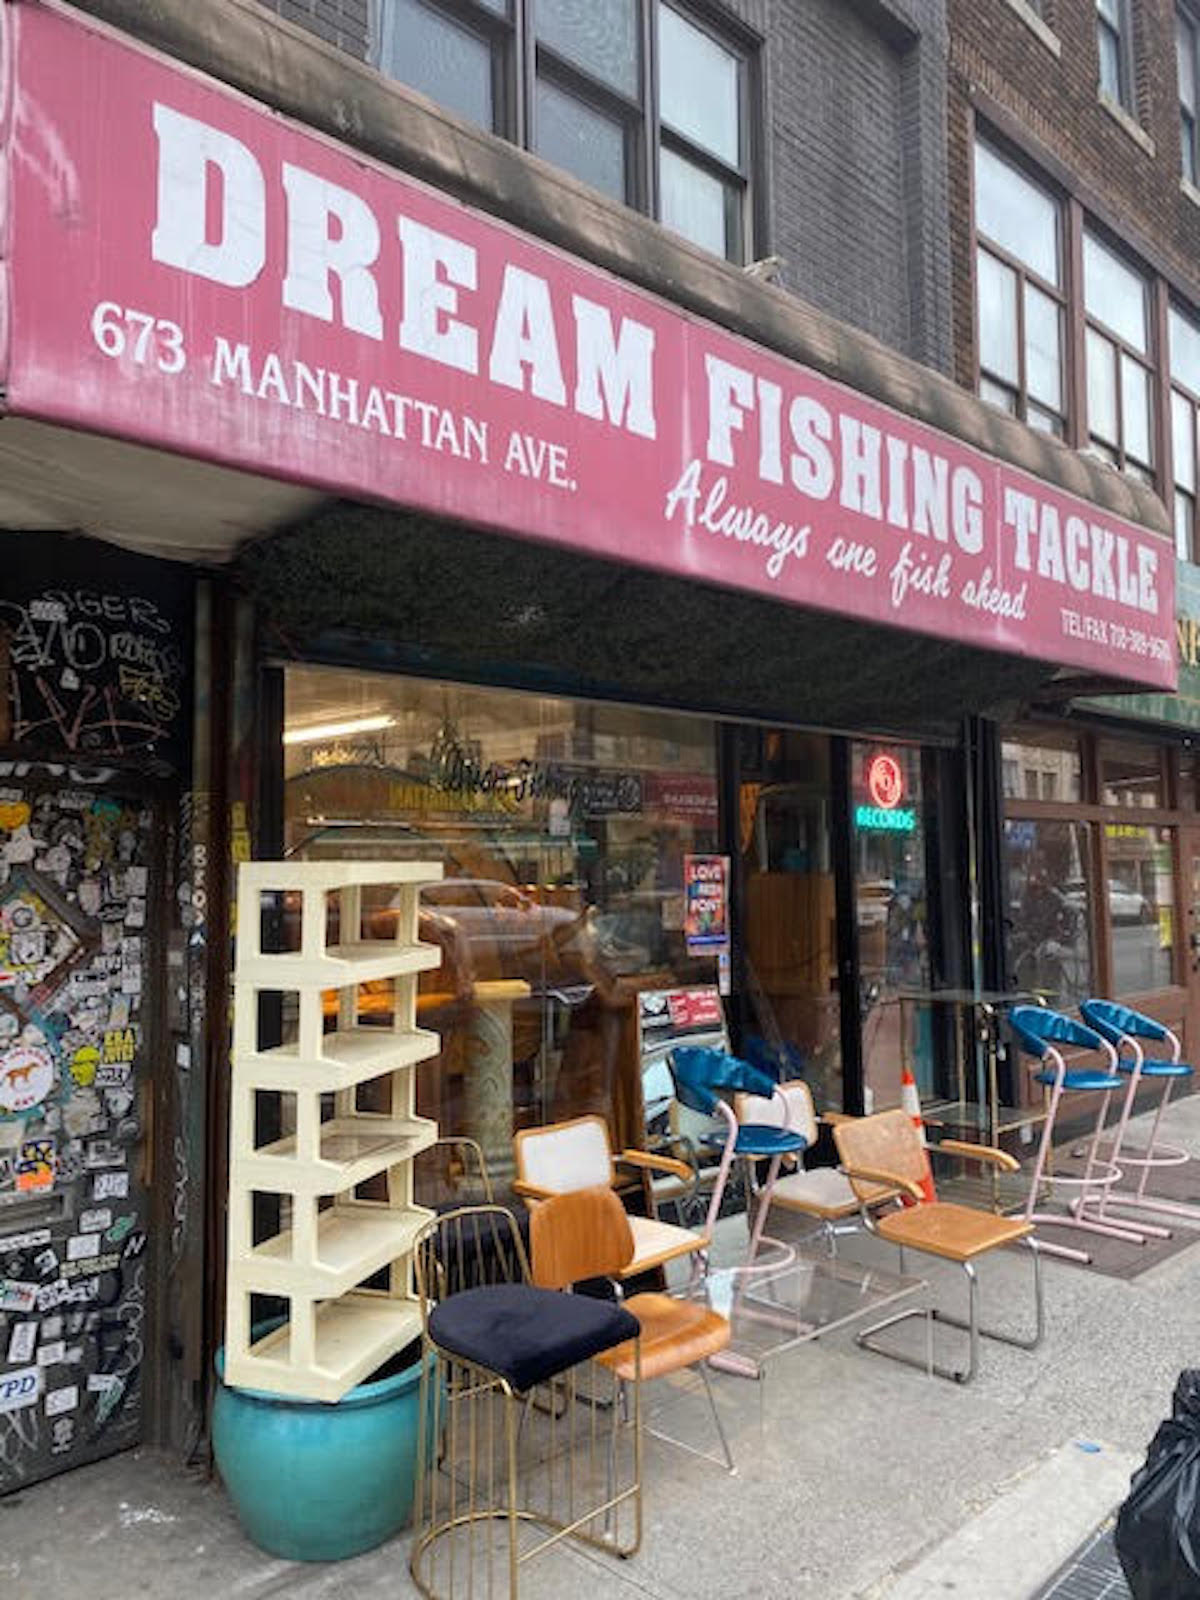 Dream Fishing Tackle: Greenpoint's Quirkiest Brick and Mortar -  Greenpointers